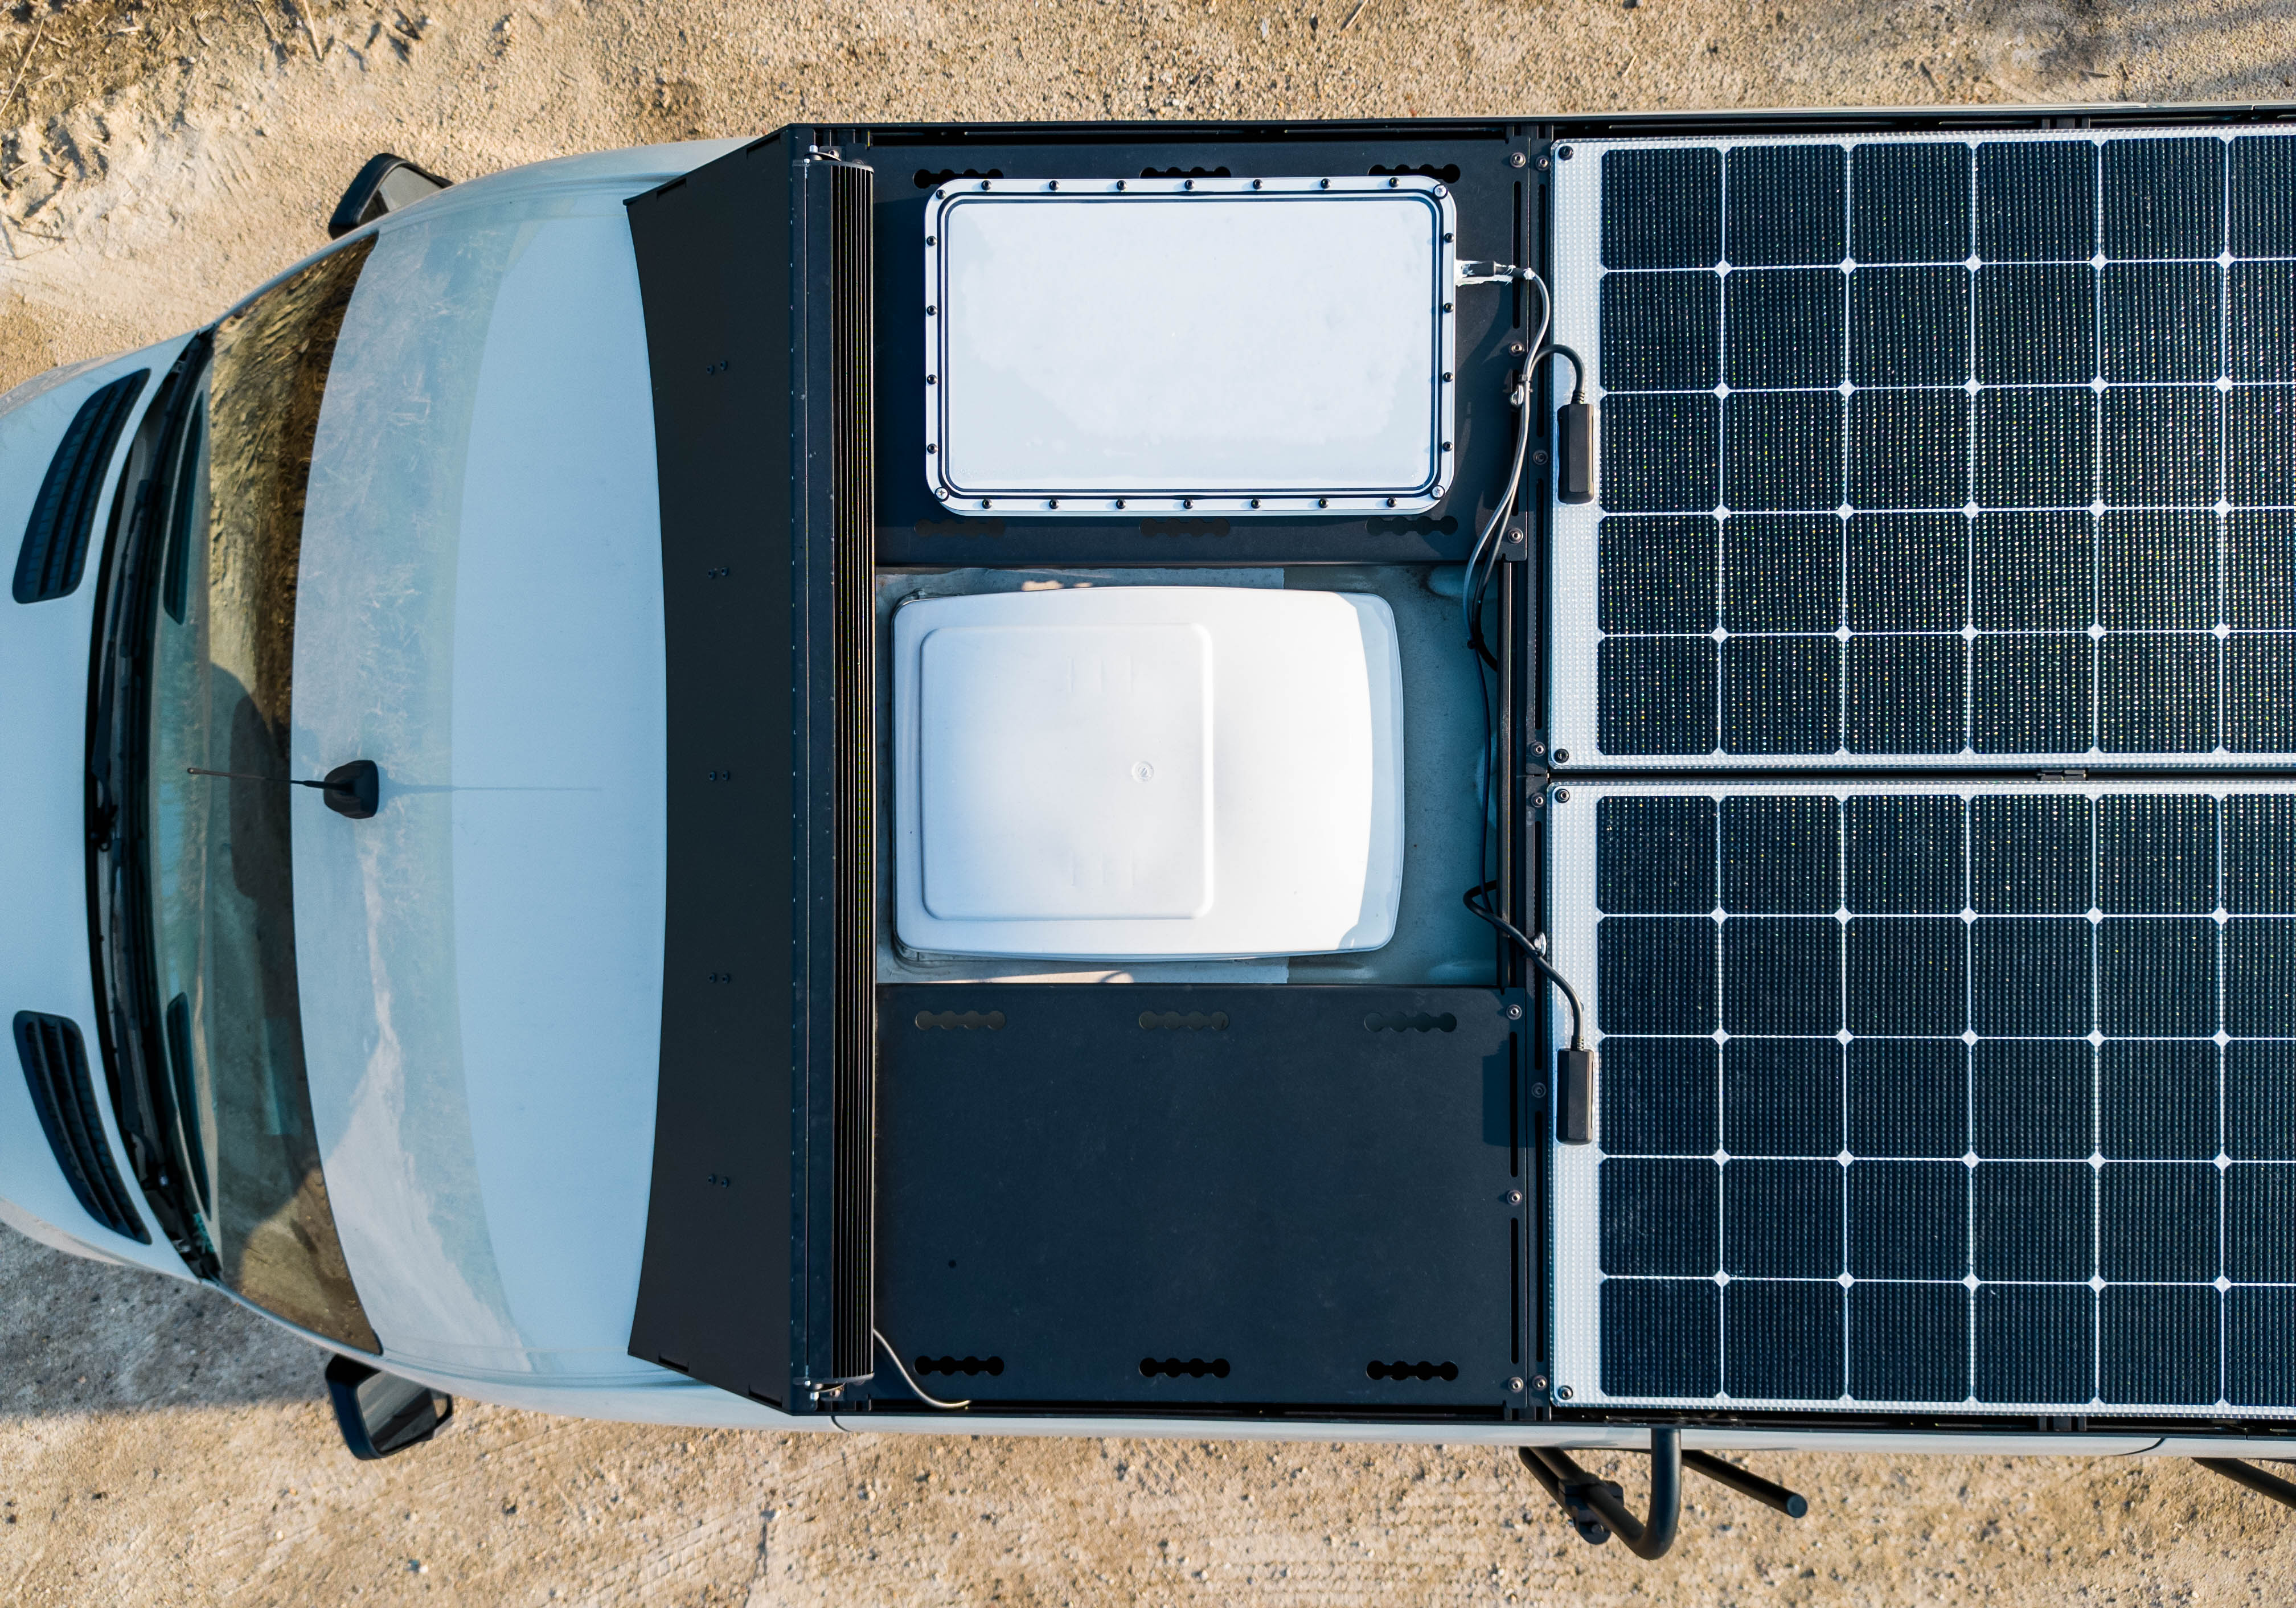 Orion roof rack with starlink deck panels and walkable solar panels